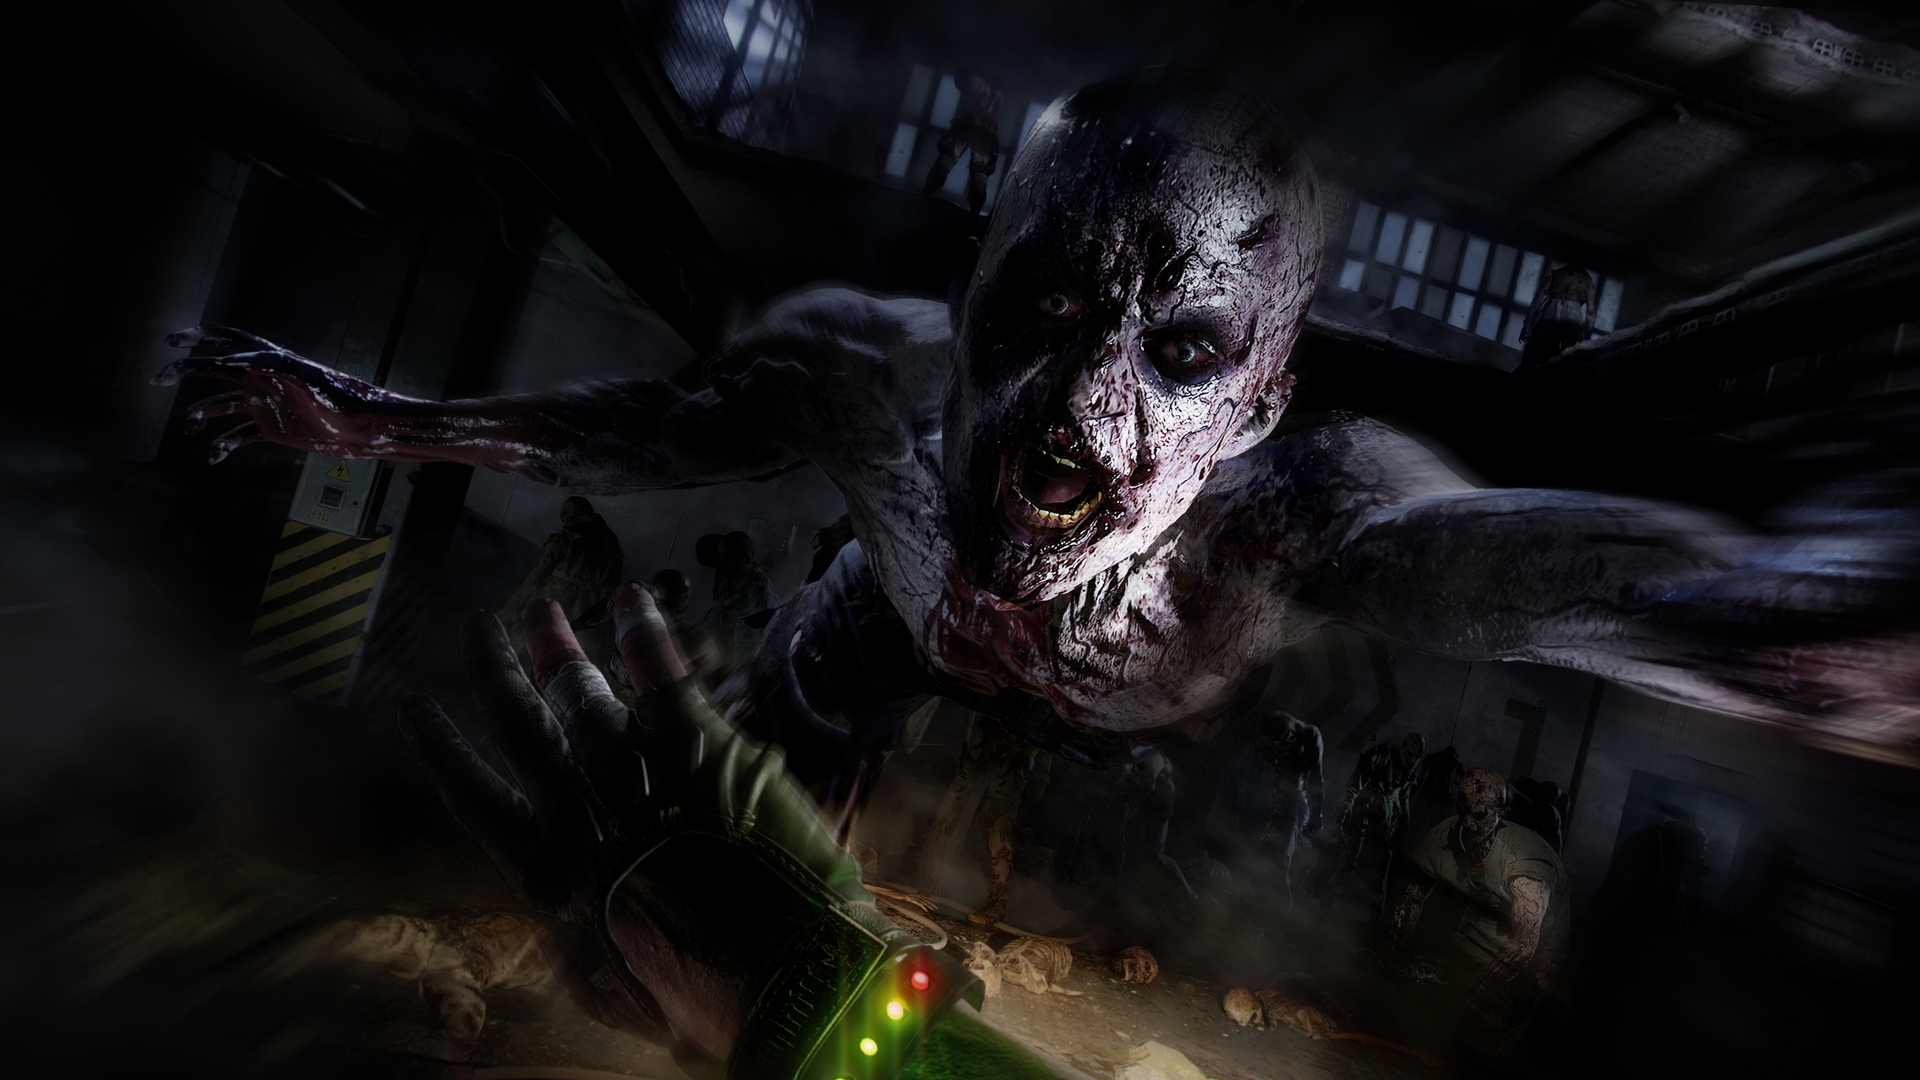 In this article, we are going to be covering the new Dying Light 2 update, which introduces many new features to the popular survival game. 